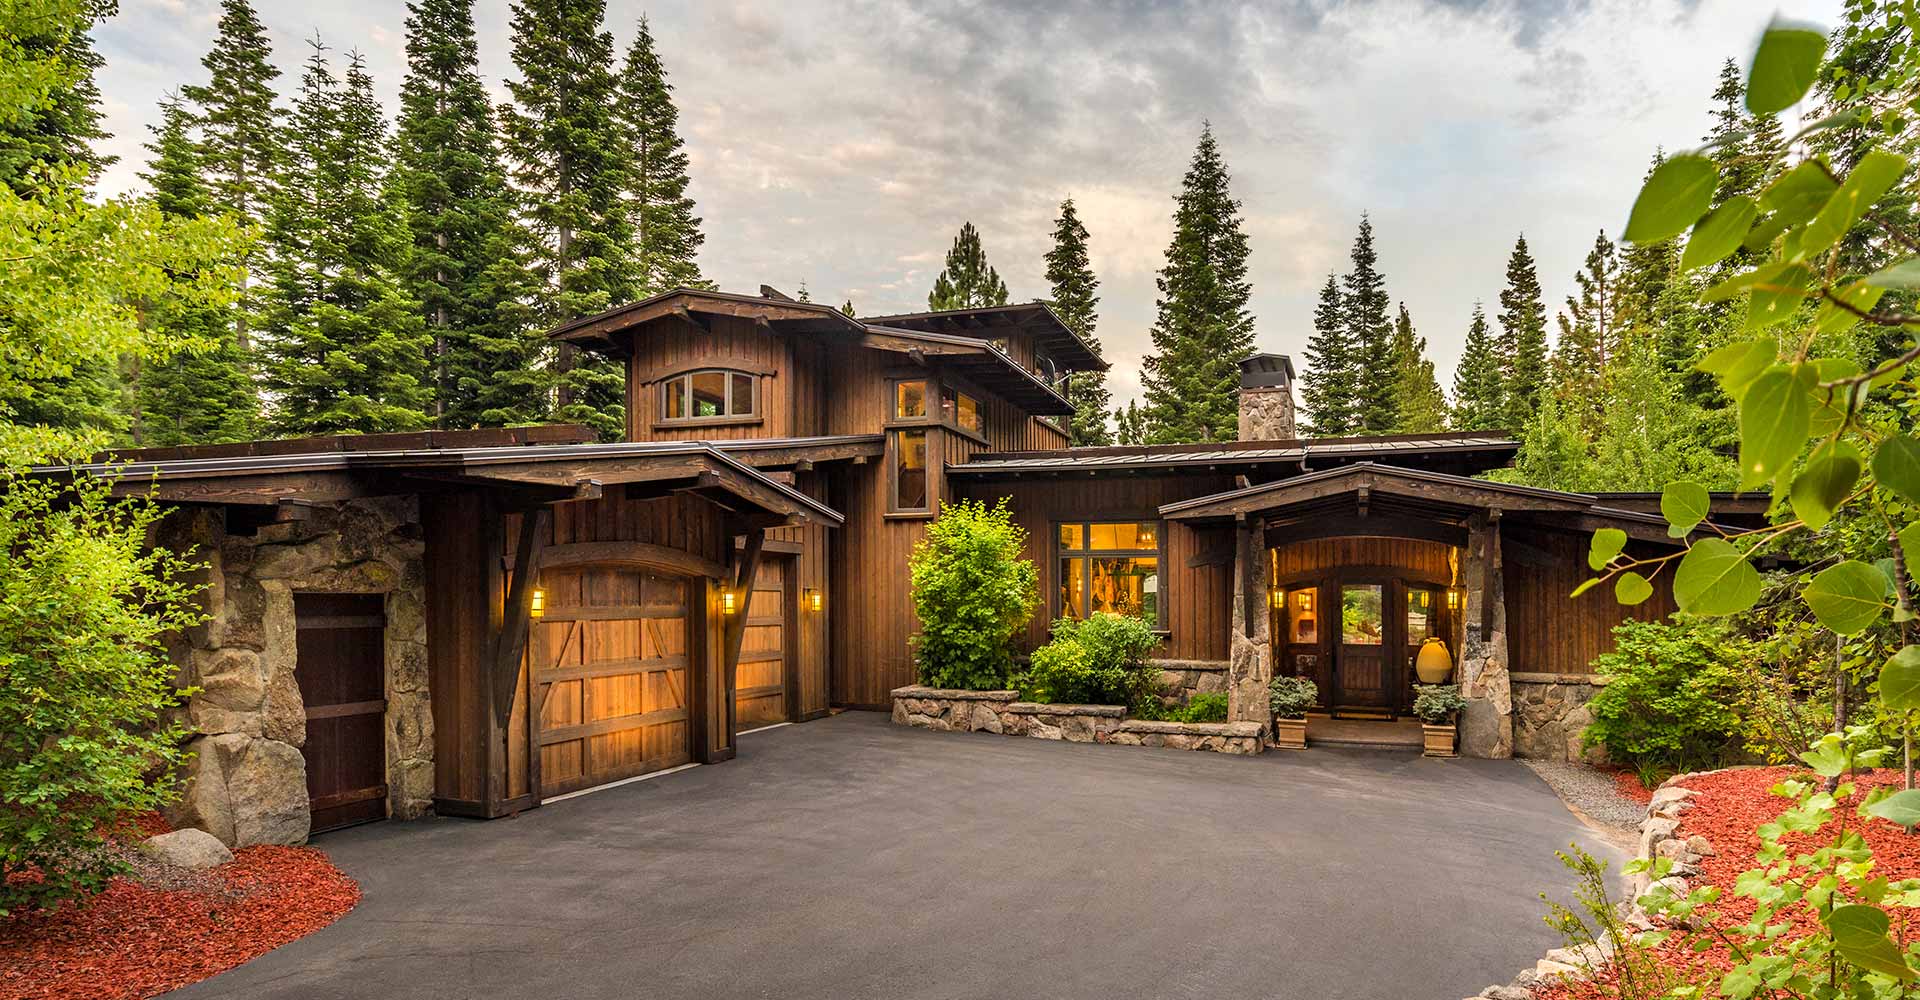 Truckee luxury homes for sale - 10915 Camp Muir Court